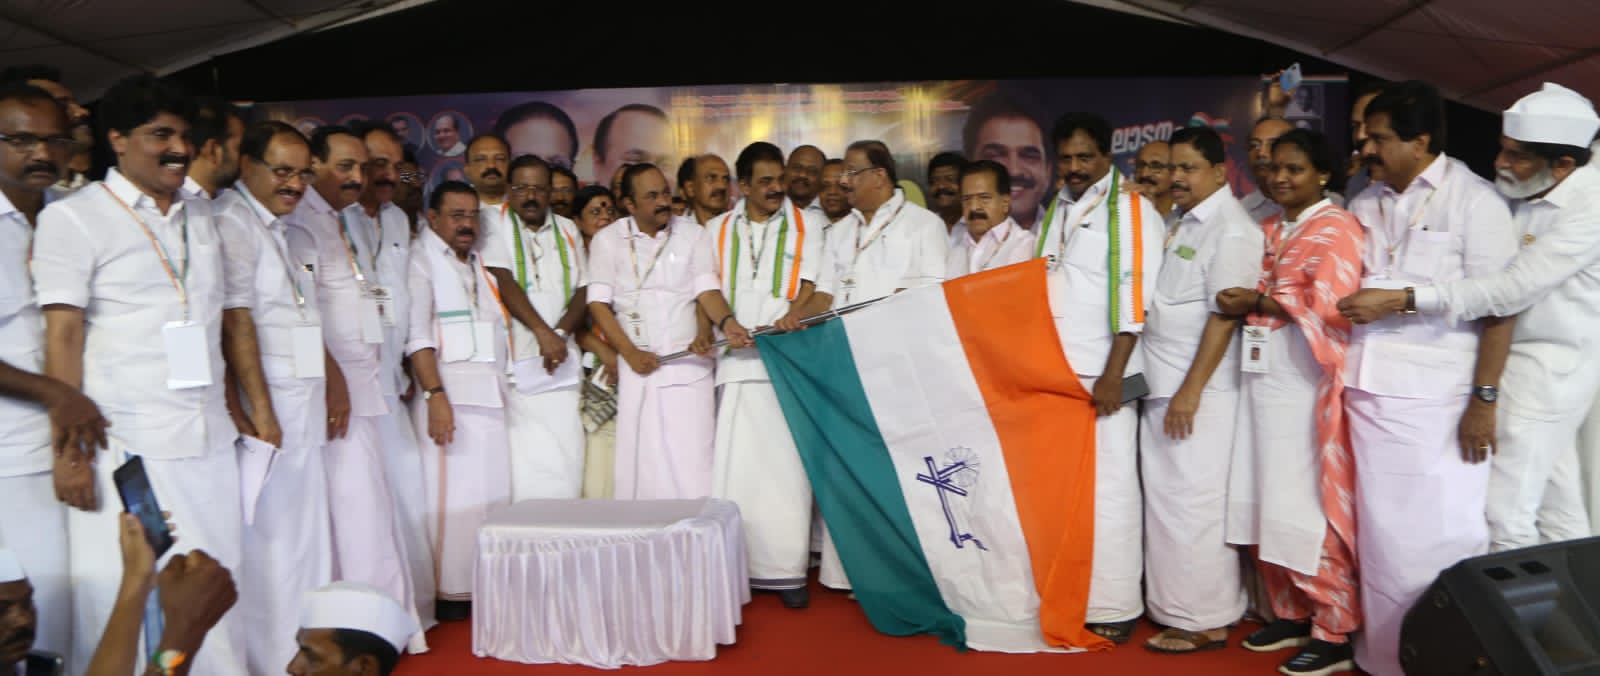 The Congress launched its statewide electioneering march, 'Samaragni' in Kasaragod on 9 February. (X)